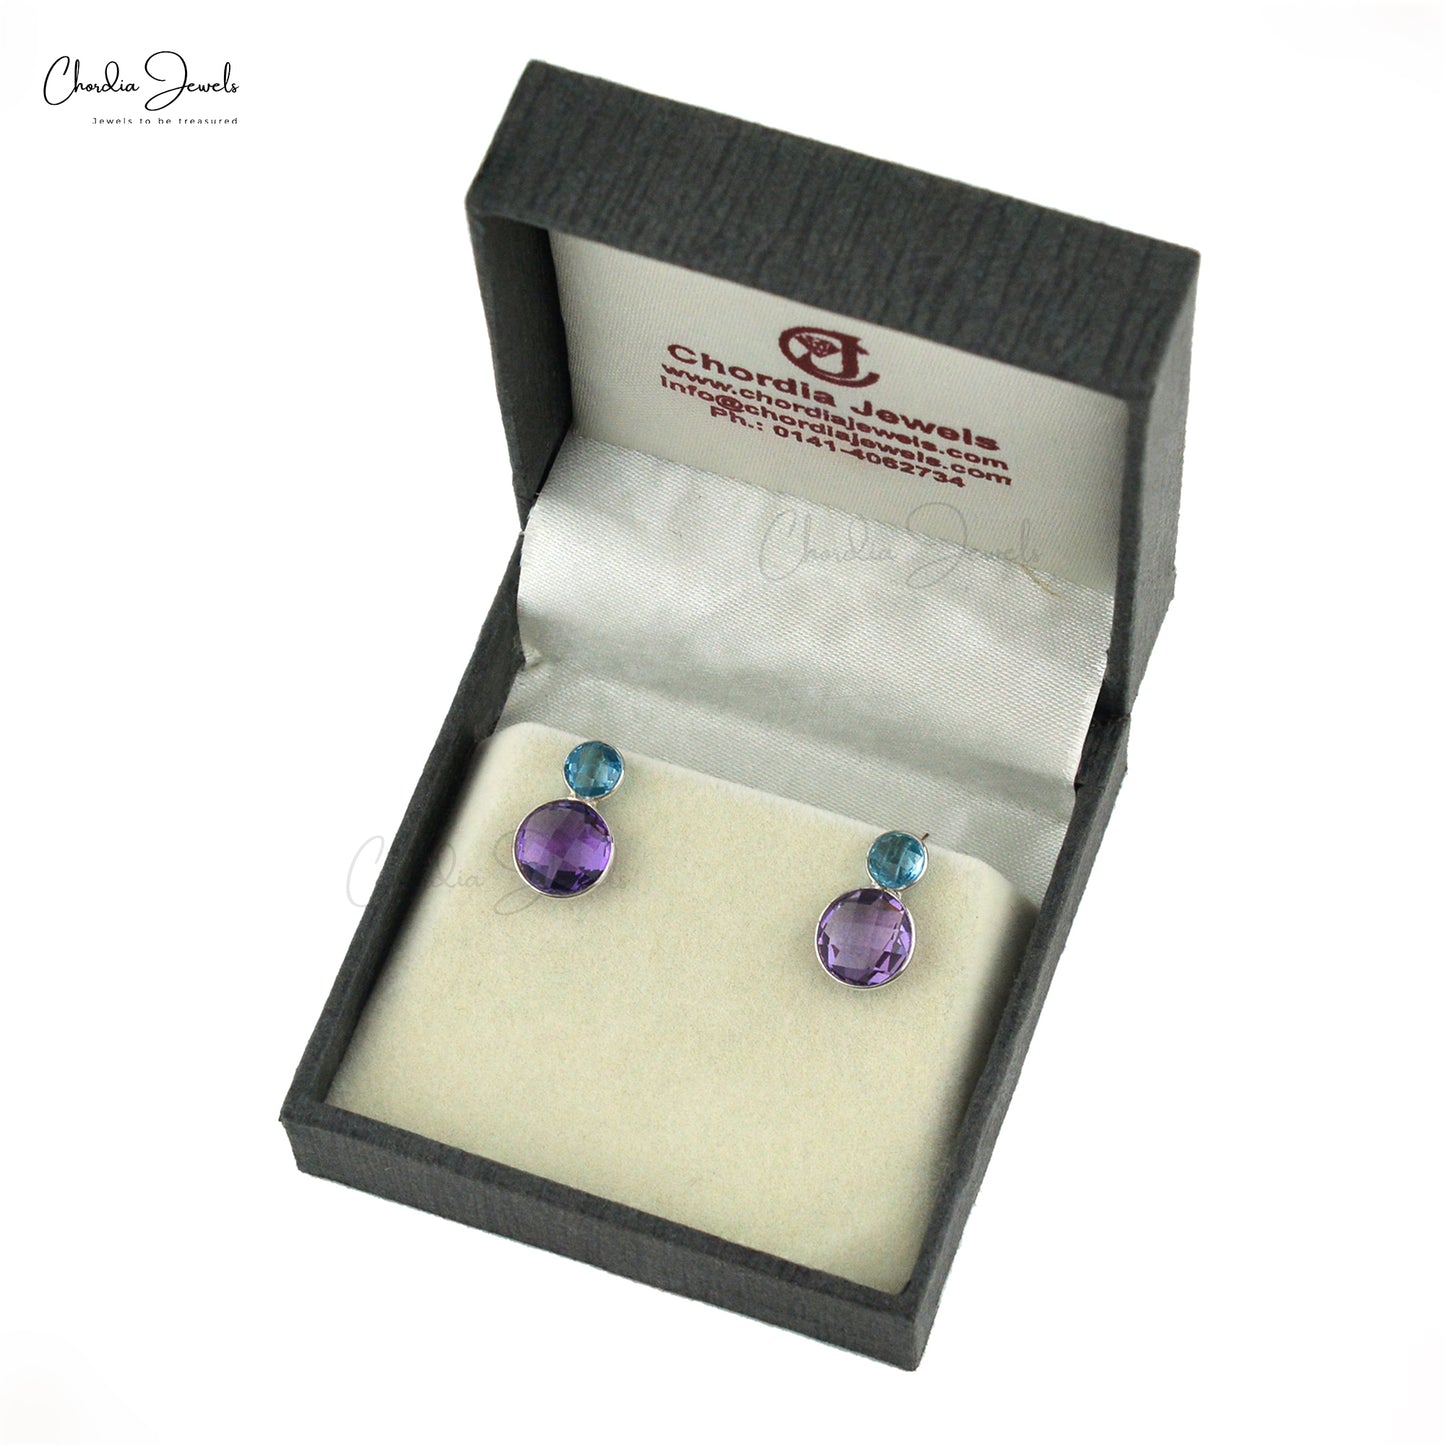 Dual Round Checker Cut 925 Sterling Silver Earrings With Amethyst & Swiss Blue Topaz Gemstone Studs From Trusted Supplier At Offer Price